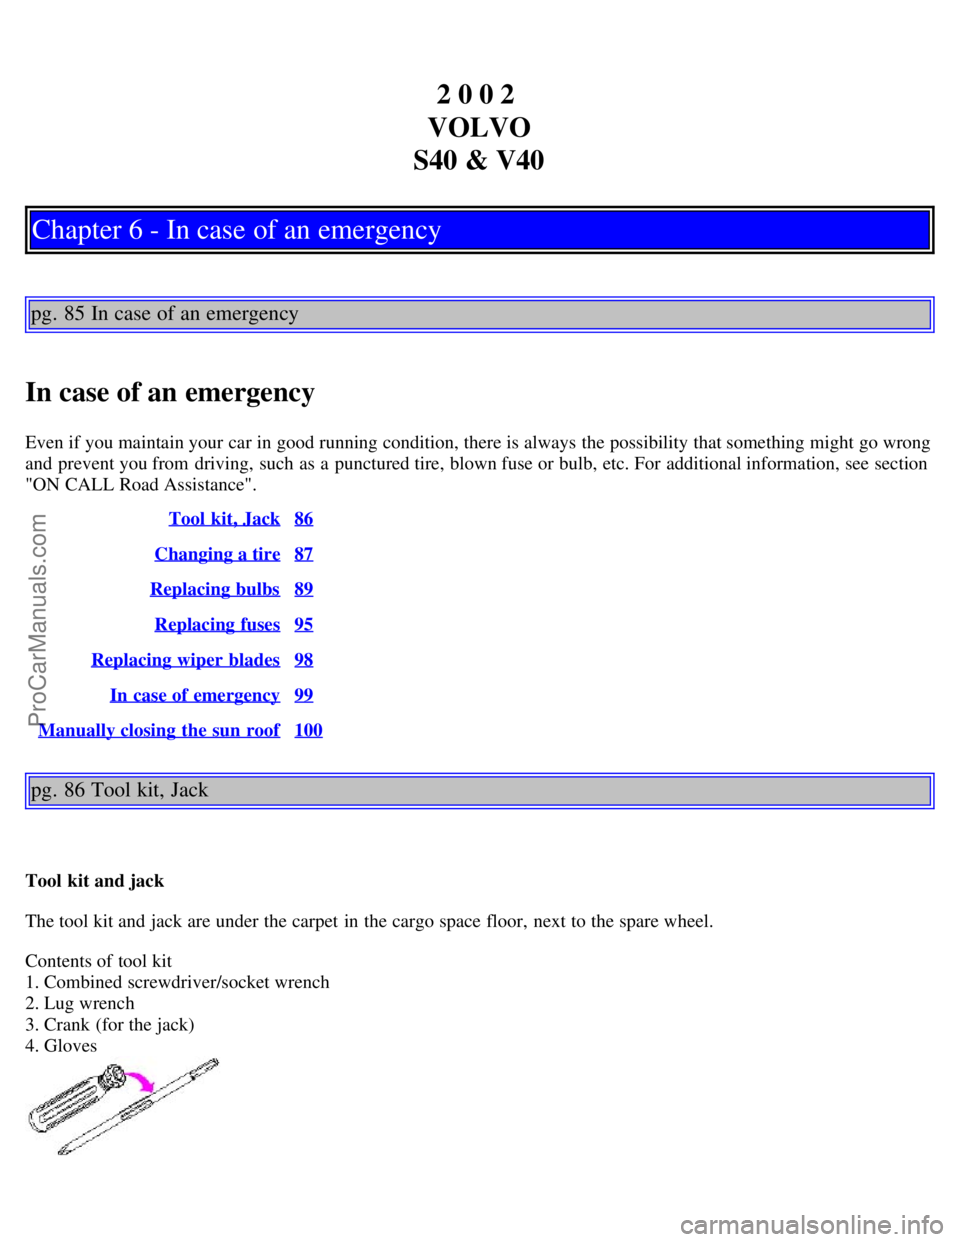 VOLVO V4 2002  Owners Manual 2 0 0 2 
VOLVO
S40 & V40
Chapter 6 - In case of an emergency
pg. 85 In case of an emergency
In case of an emergency
Even if you maintain your car in good running condition, there is always the possibi